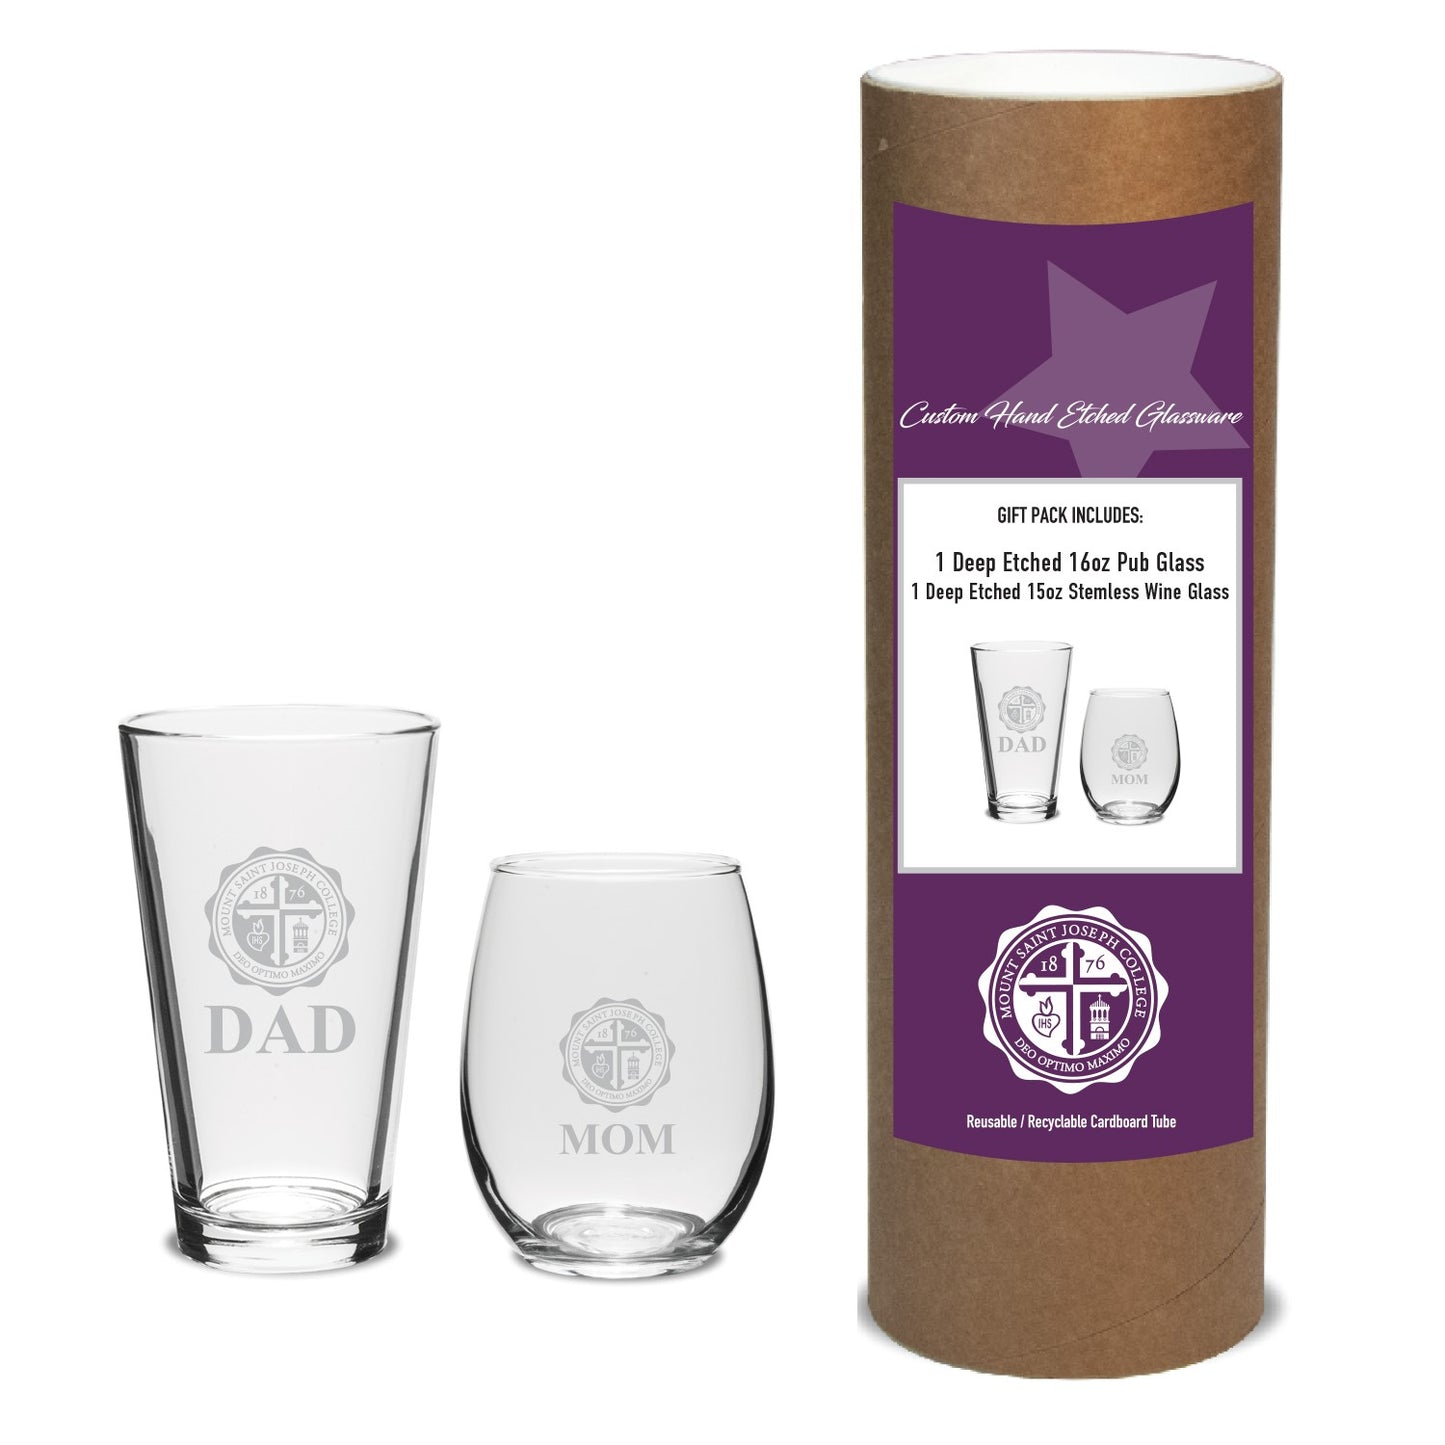 Mom & Dad Canister Glass Gift Set